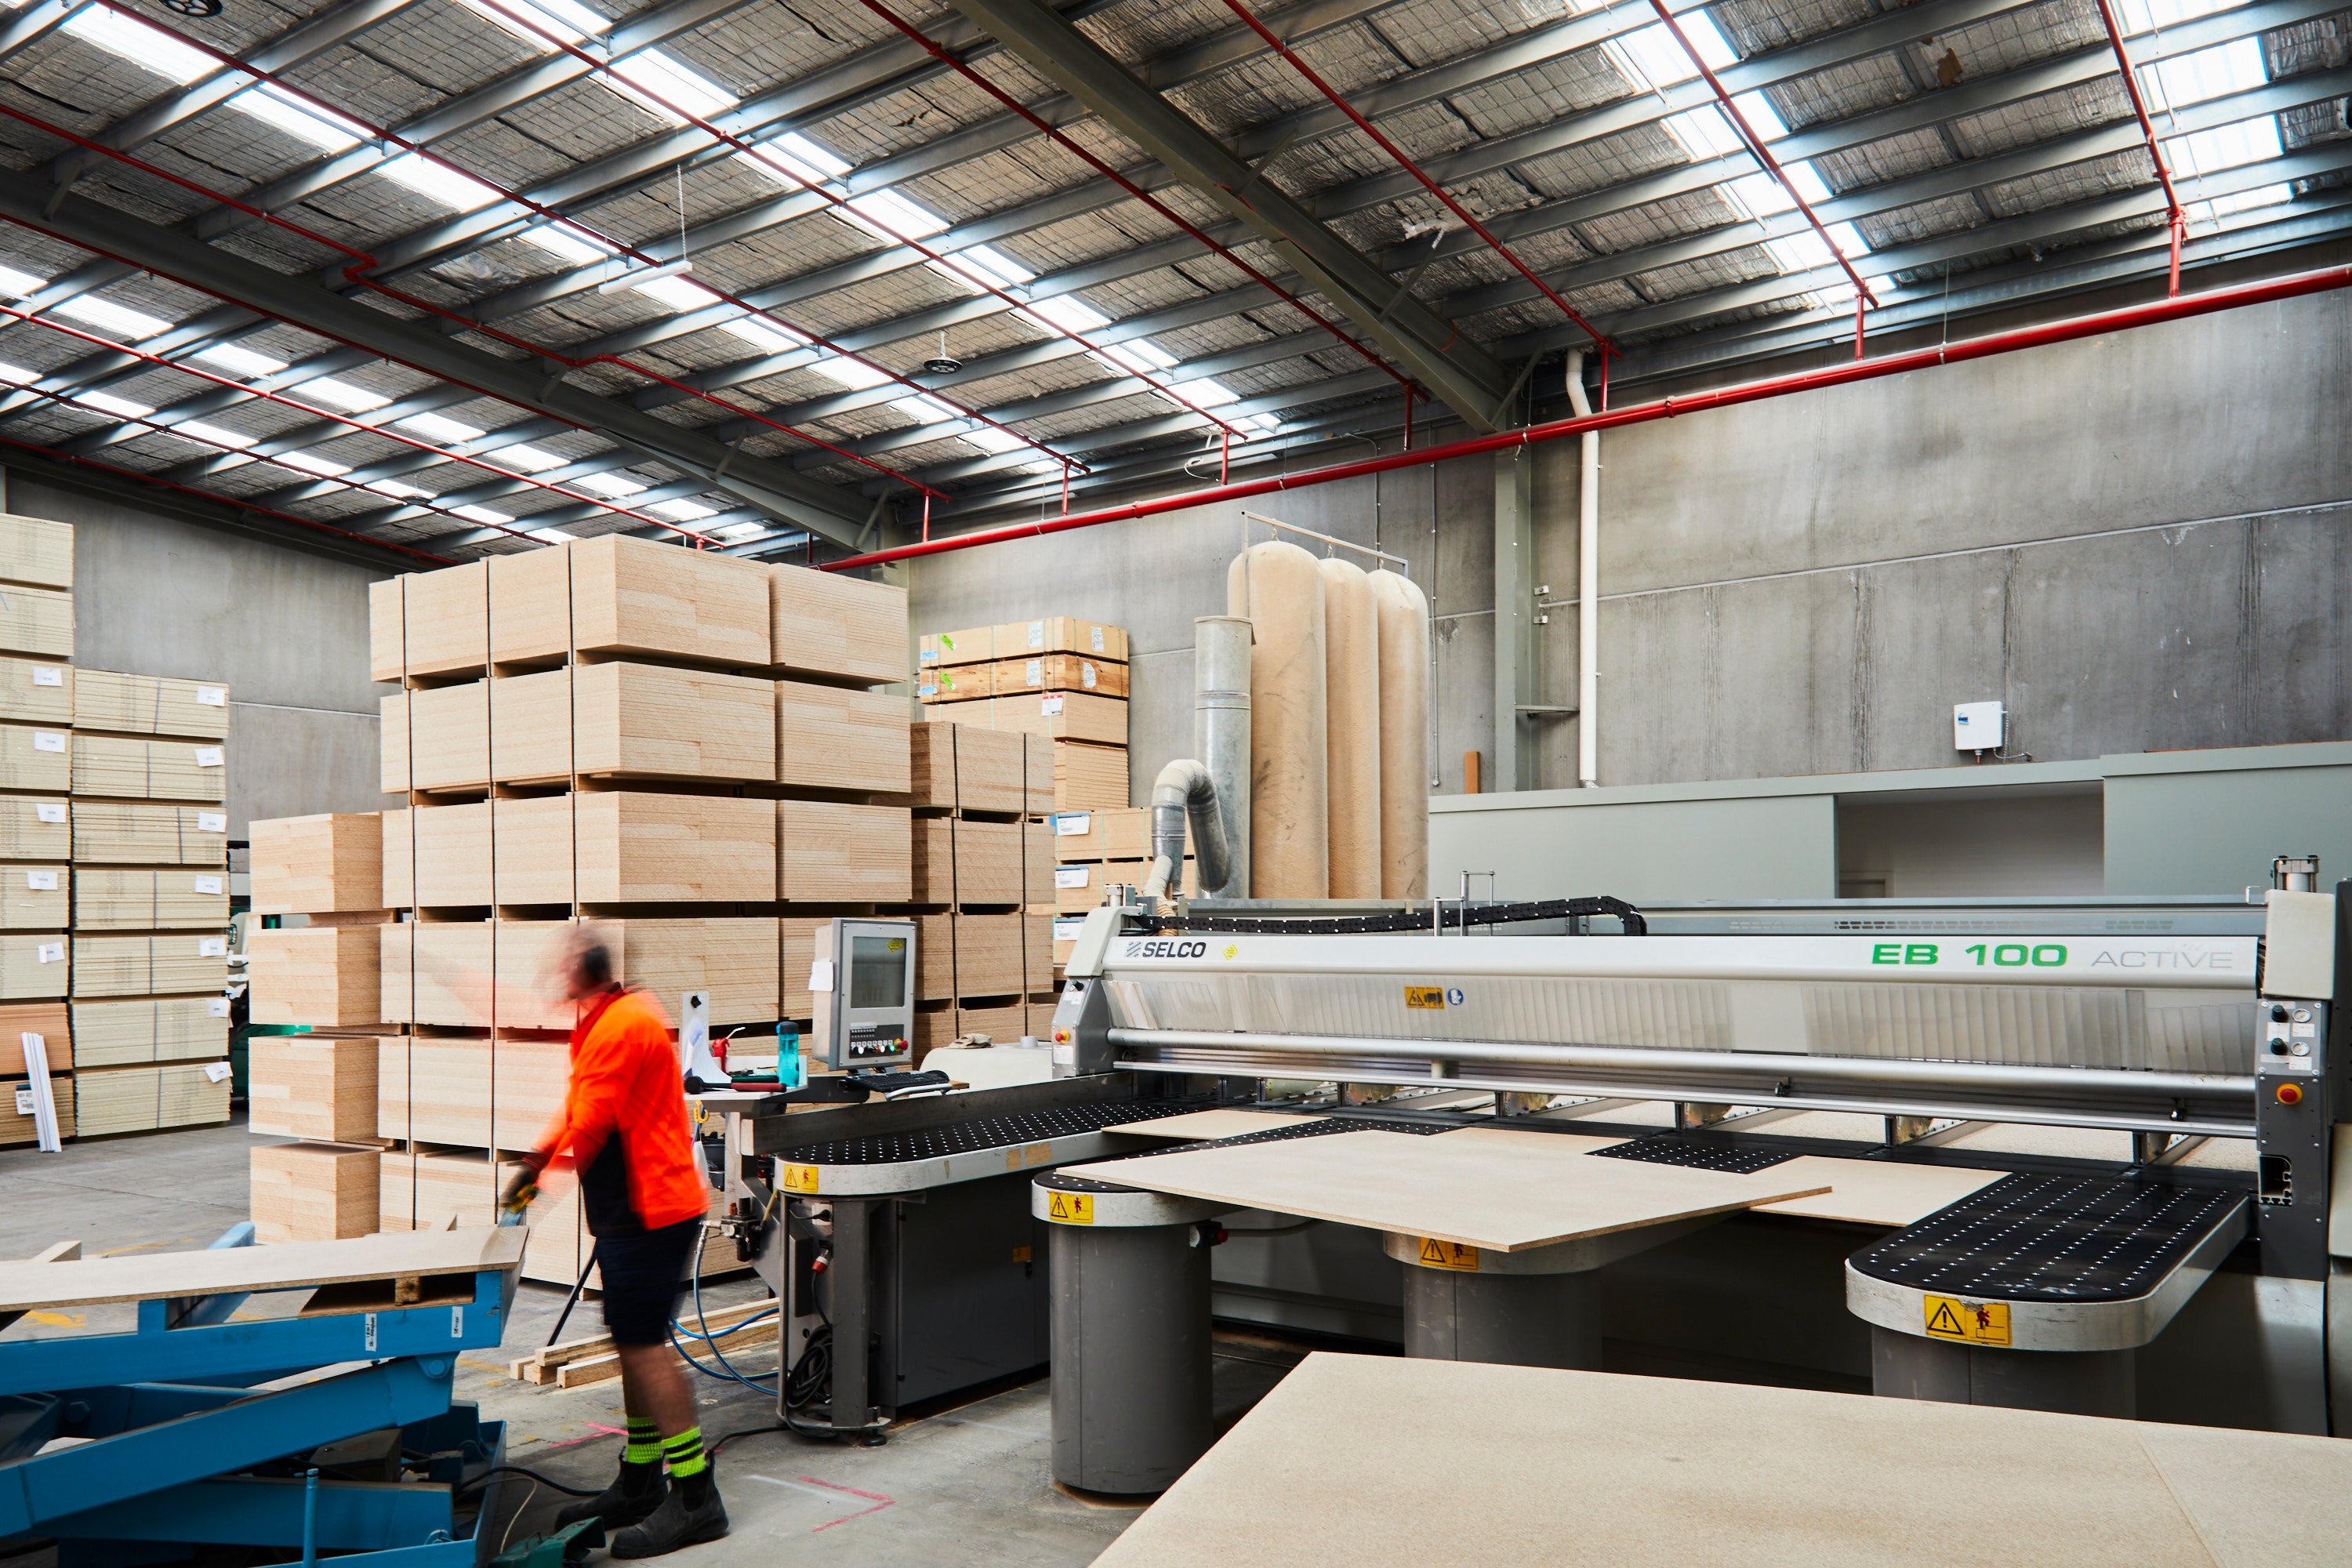 Local plywood supplier Plyco's Mornington manufacturing facility